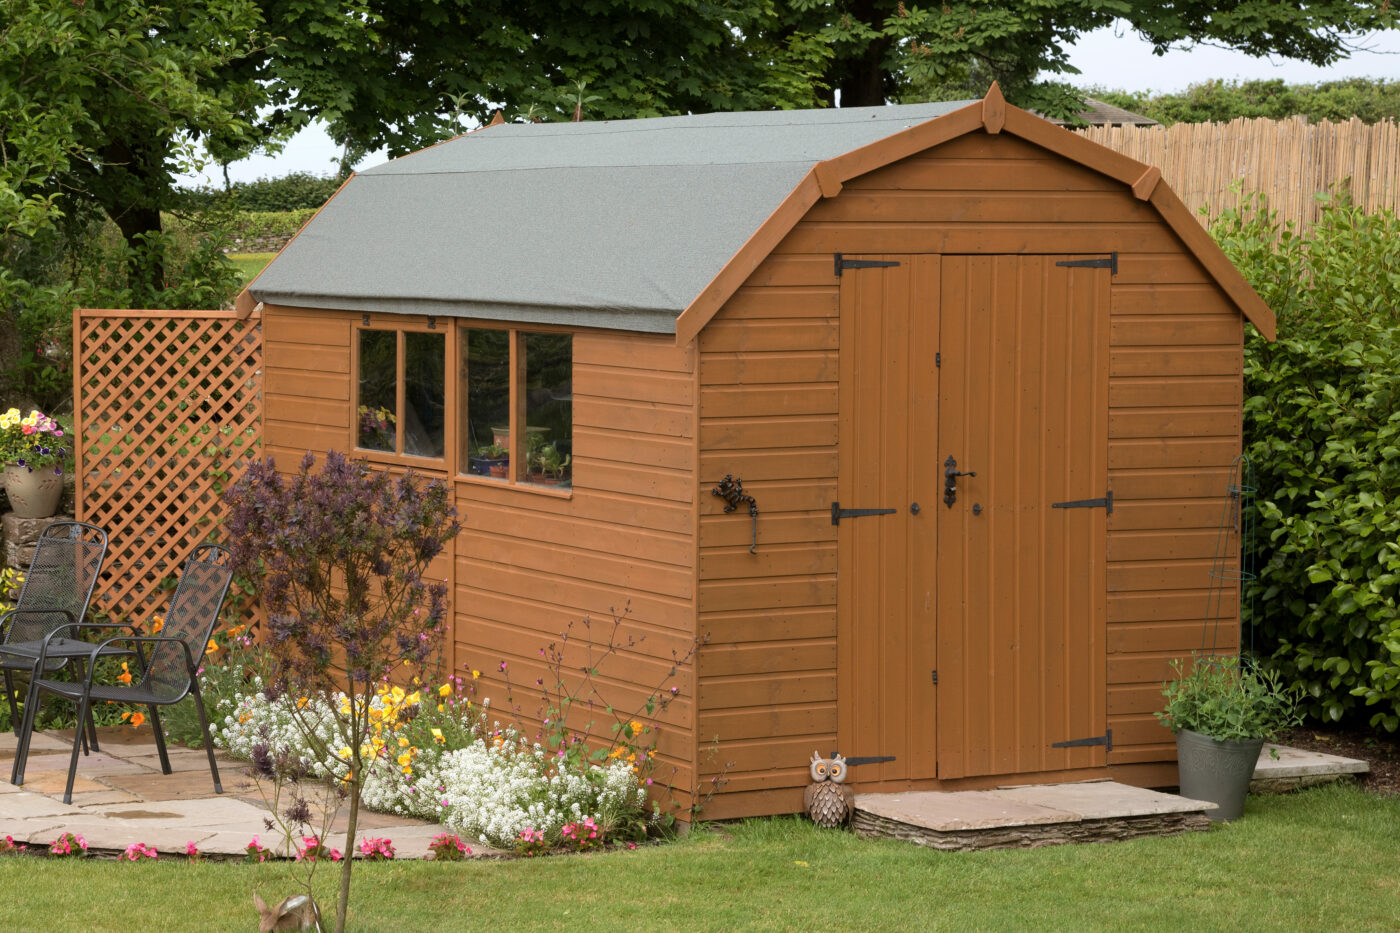 Small Backyard Shed features